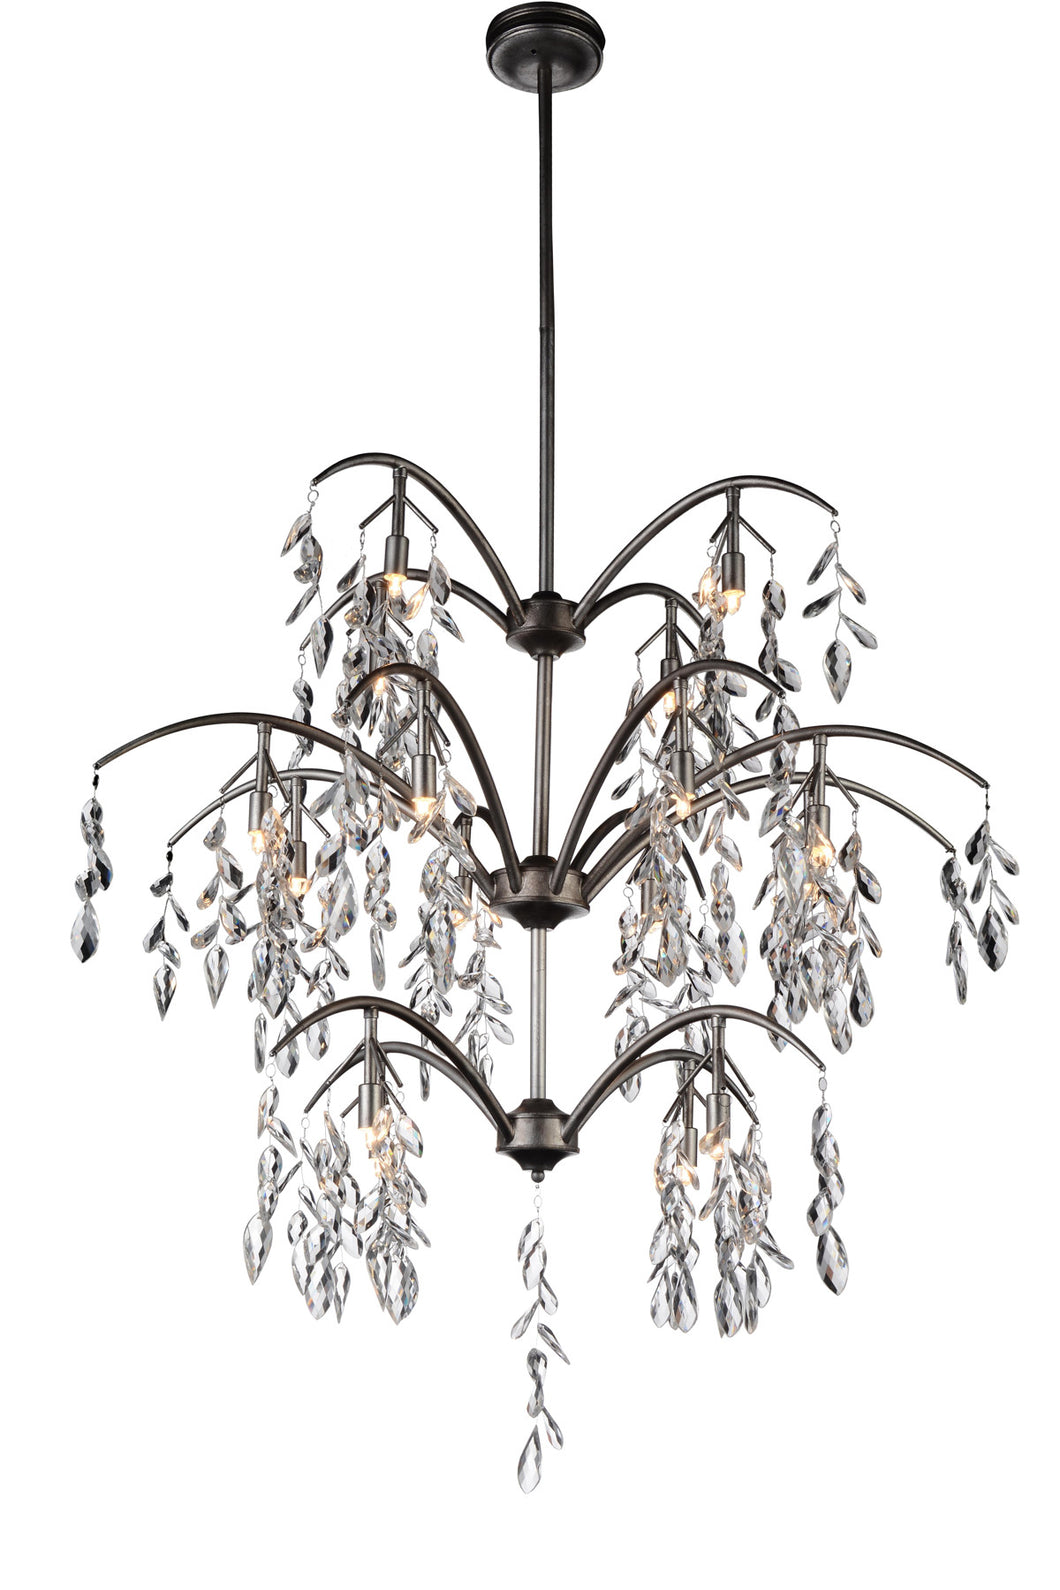 16 Light Down Chandelier with Silver Mist finish